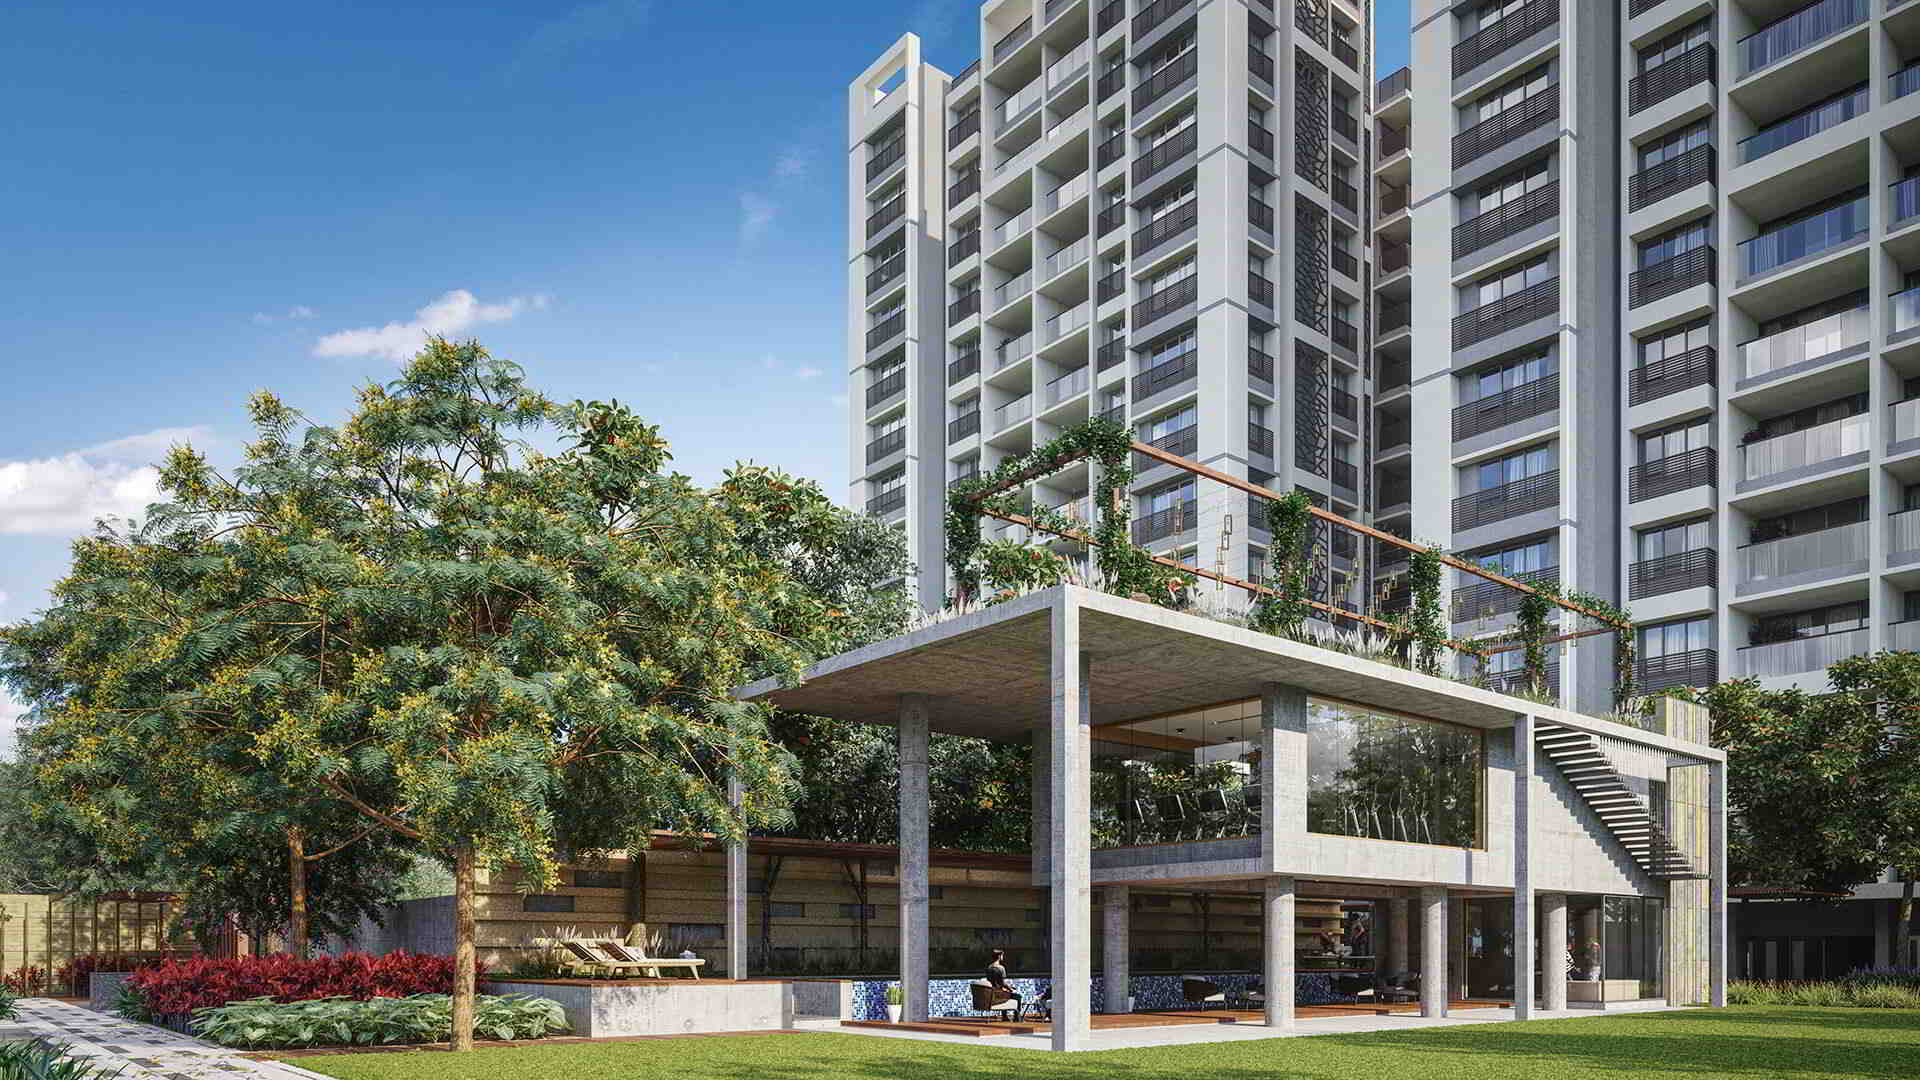 3 & 4 BHK Flats For Sale In Serenity Lavish, Science City, Ahmedabad.